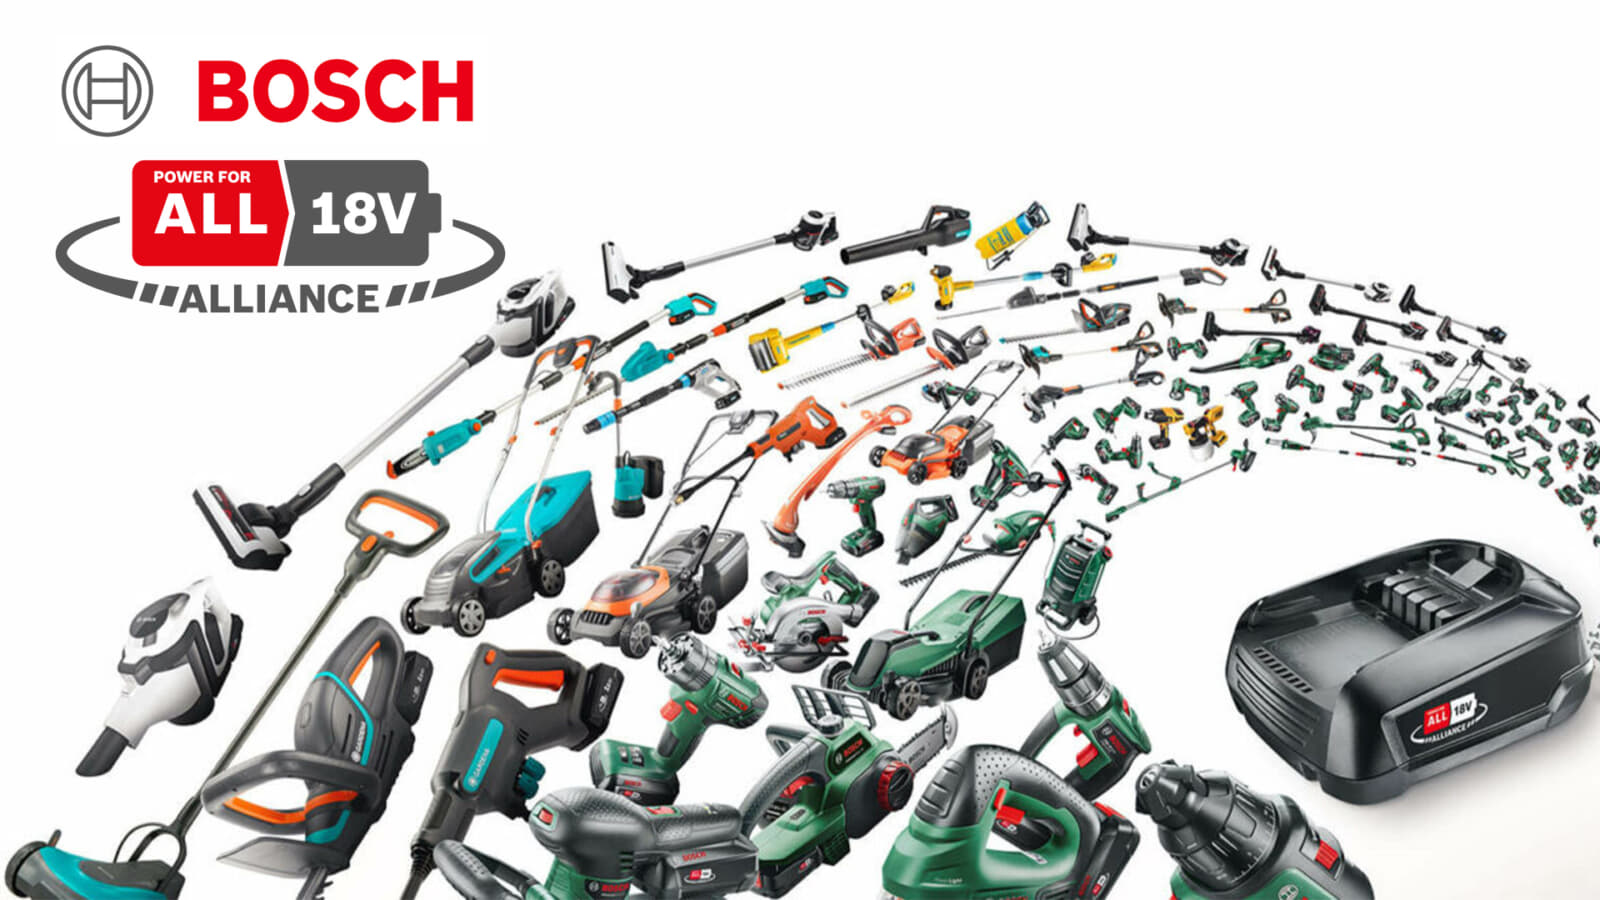 BOSCH (ボッシュ) POWER FOR ALL ALLIANCE、家庭向け工具の共通